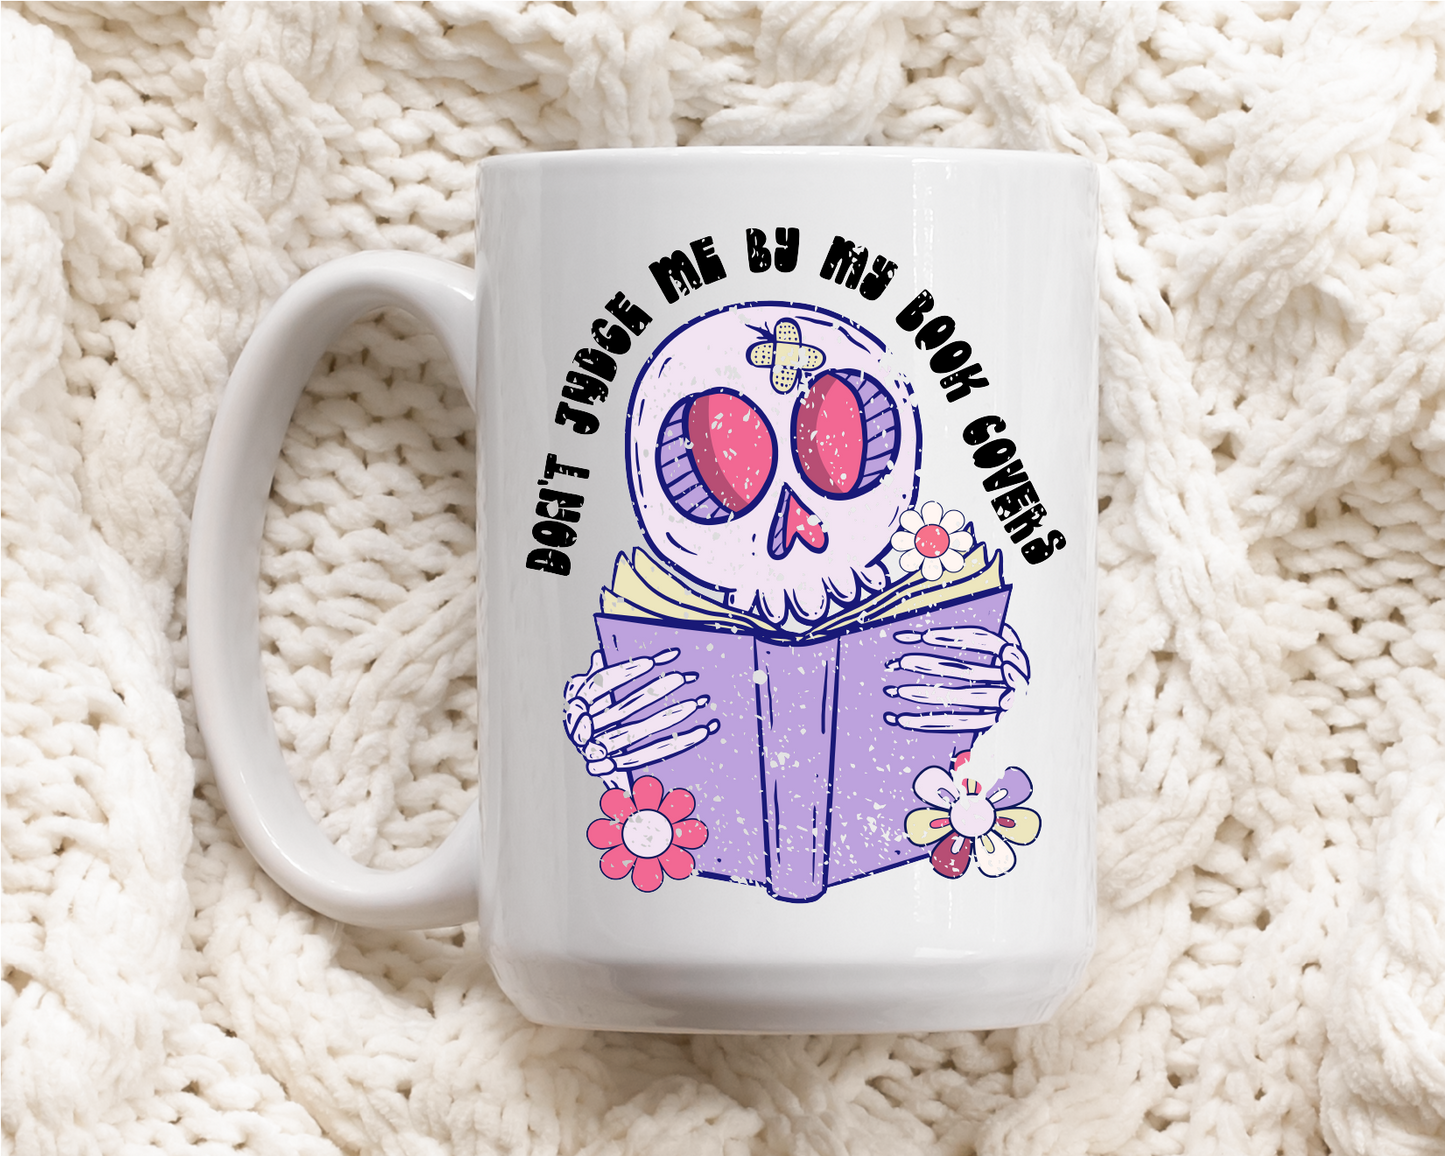 Don't Judge Me By My Book Covers Ceramic Mug | Bookish